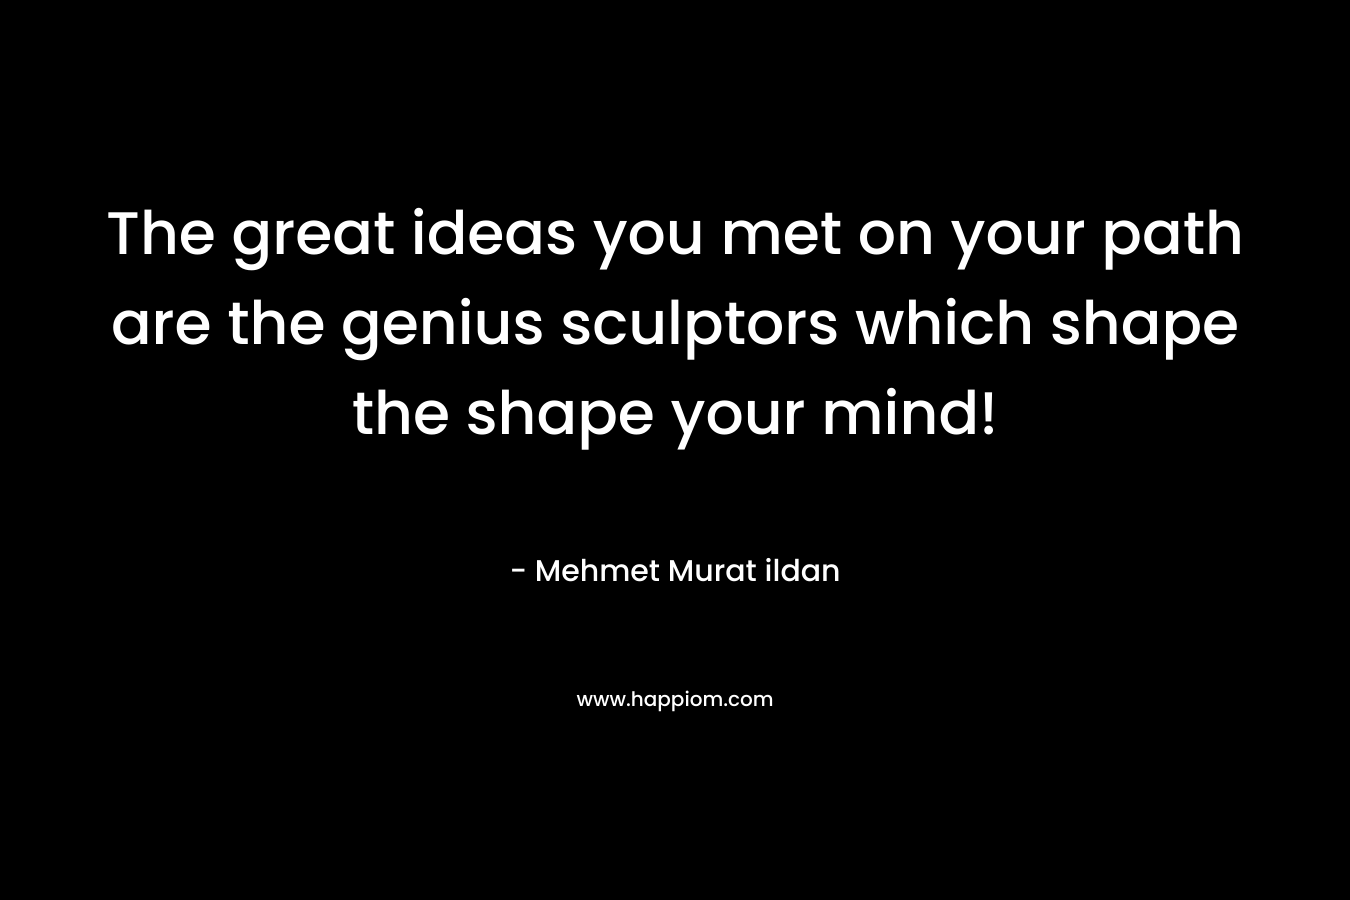 The great ideas you met on your path are the genius sculptors which shape the shape your mind!